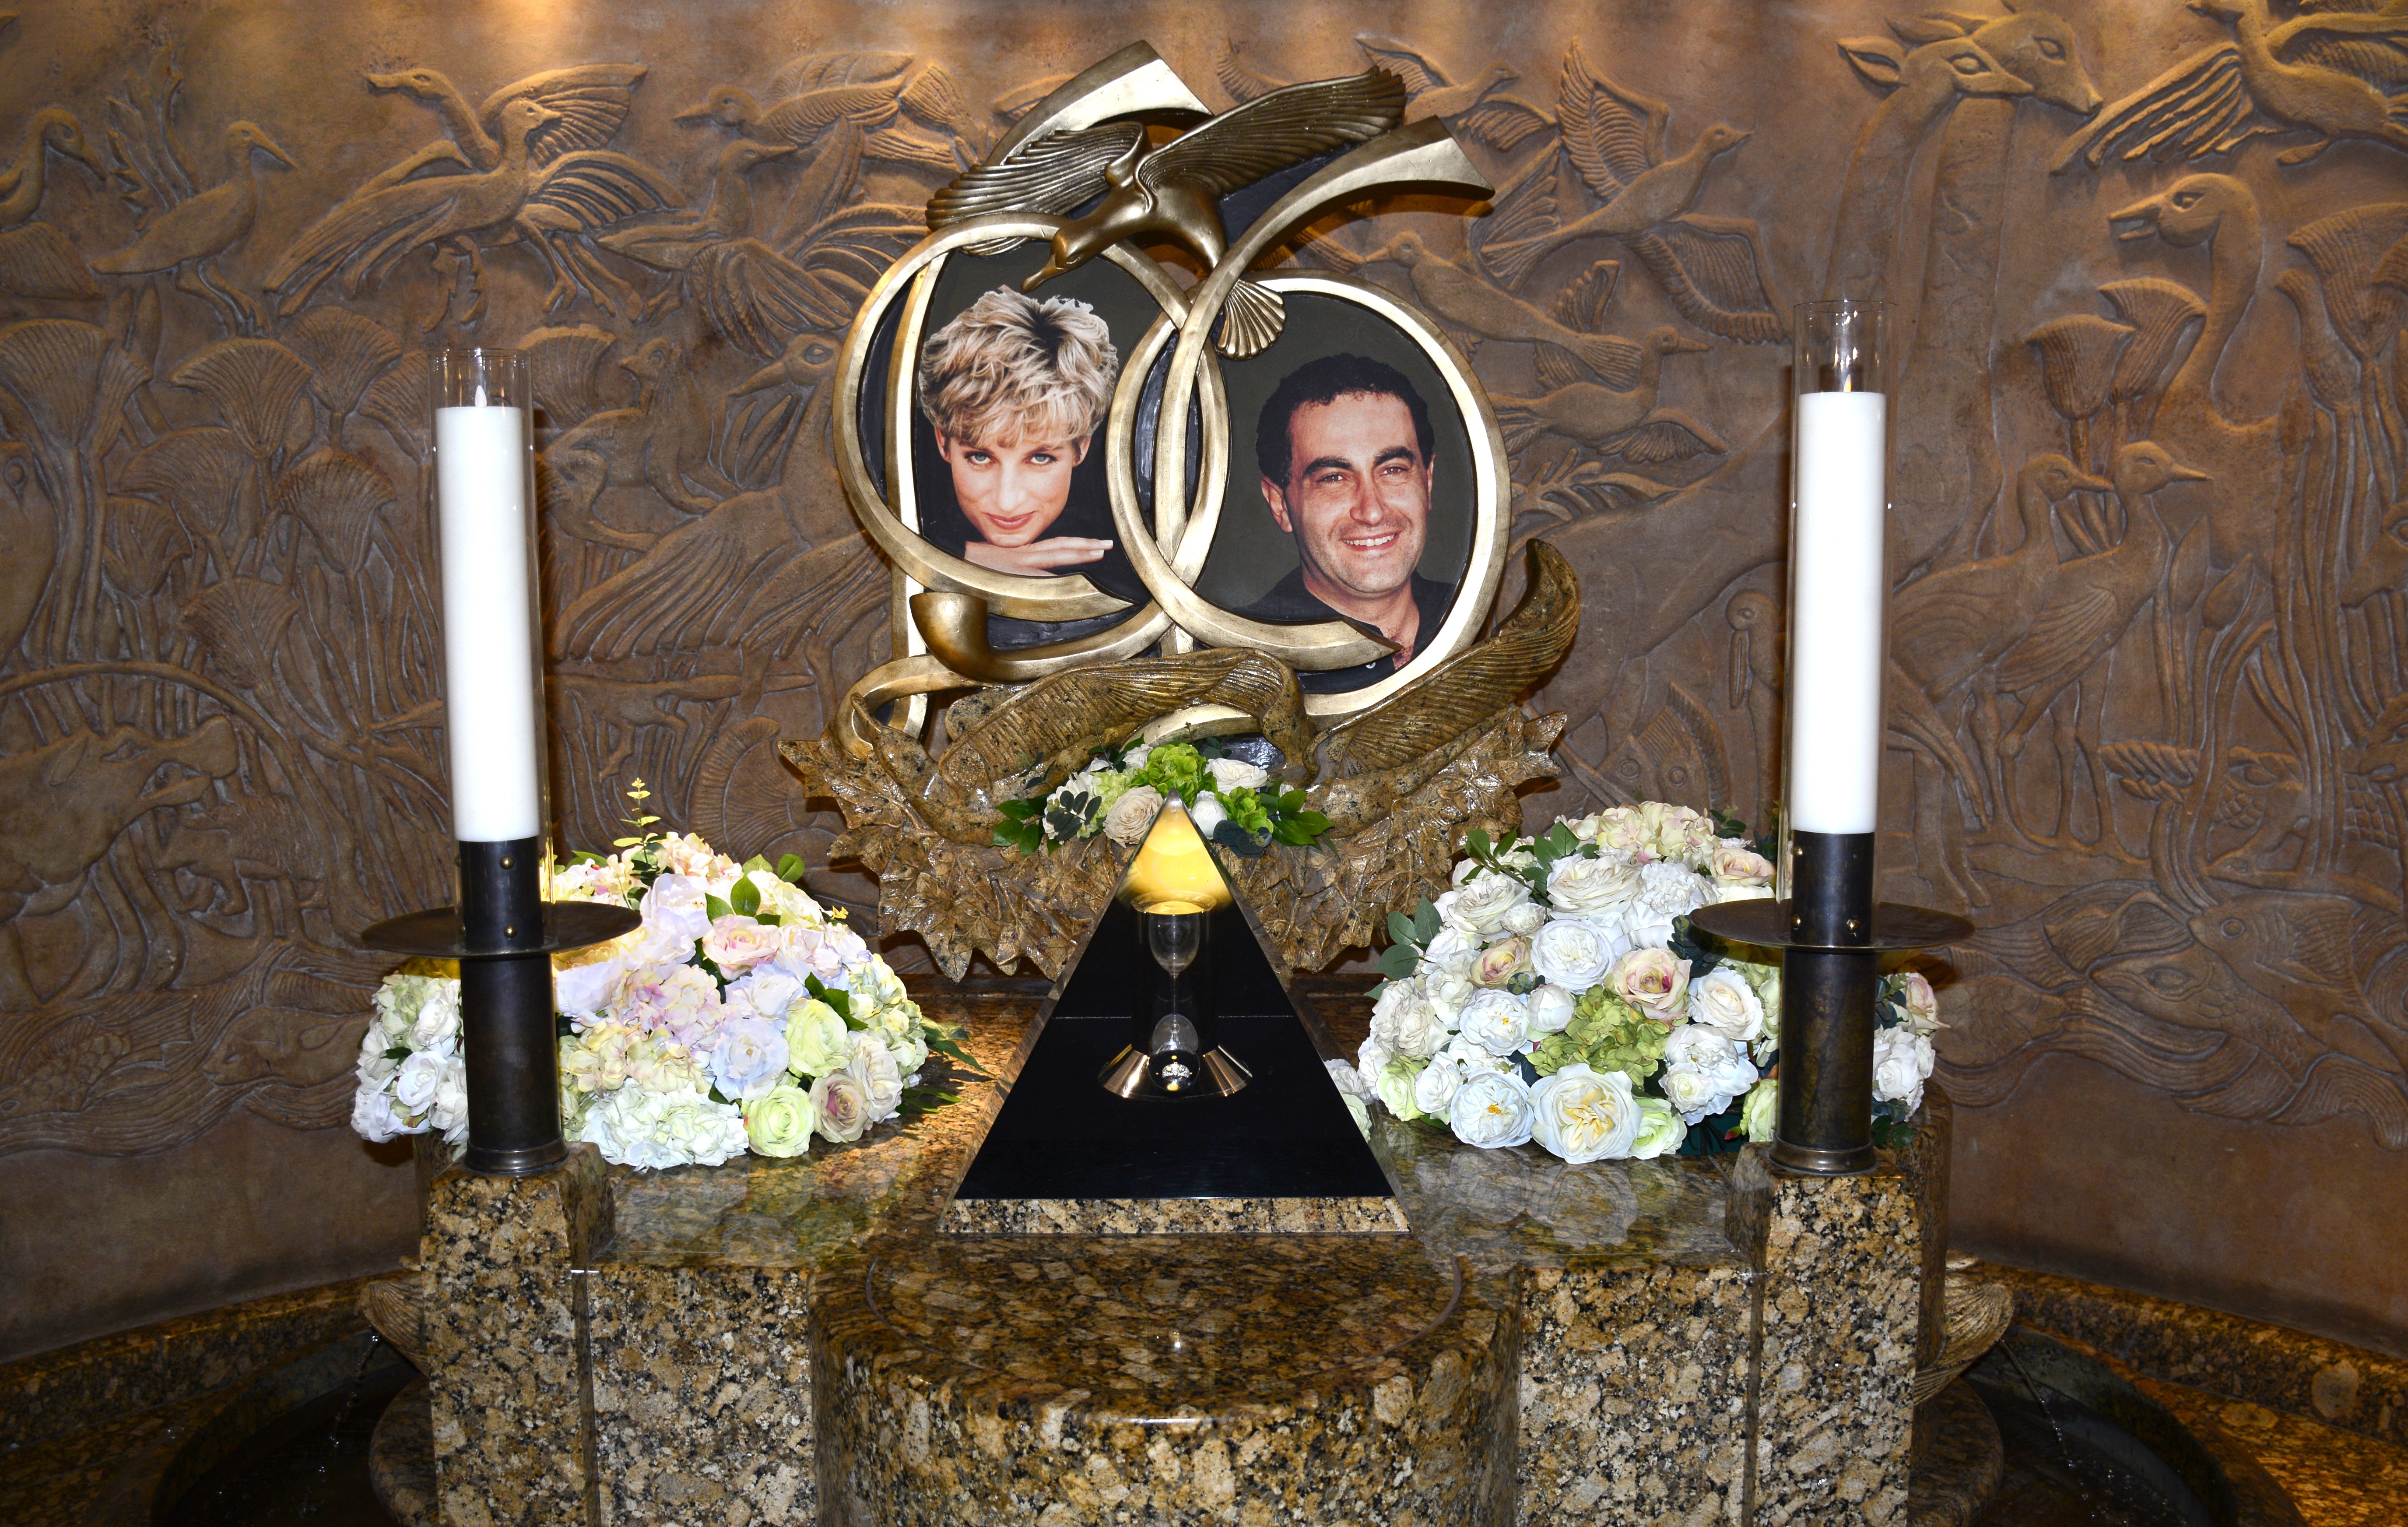 A memorial to Princess Diana and Dodi Fayed is an attraction at Harrods department store in London, England. September 25 2017 | Source: Getty Images